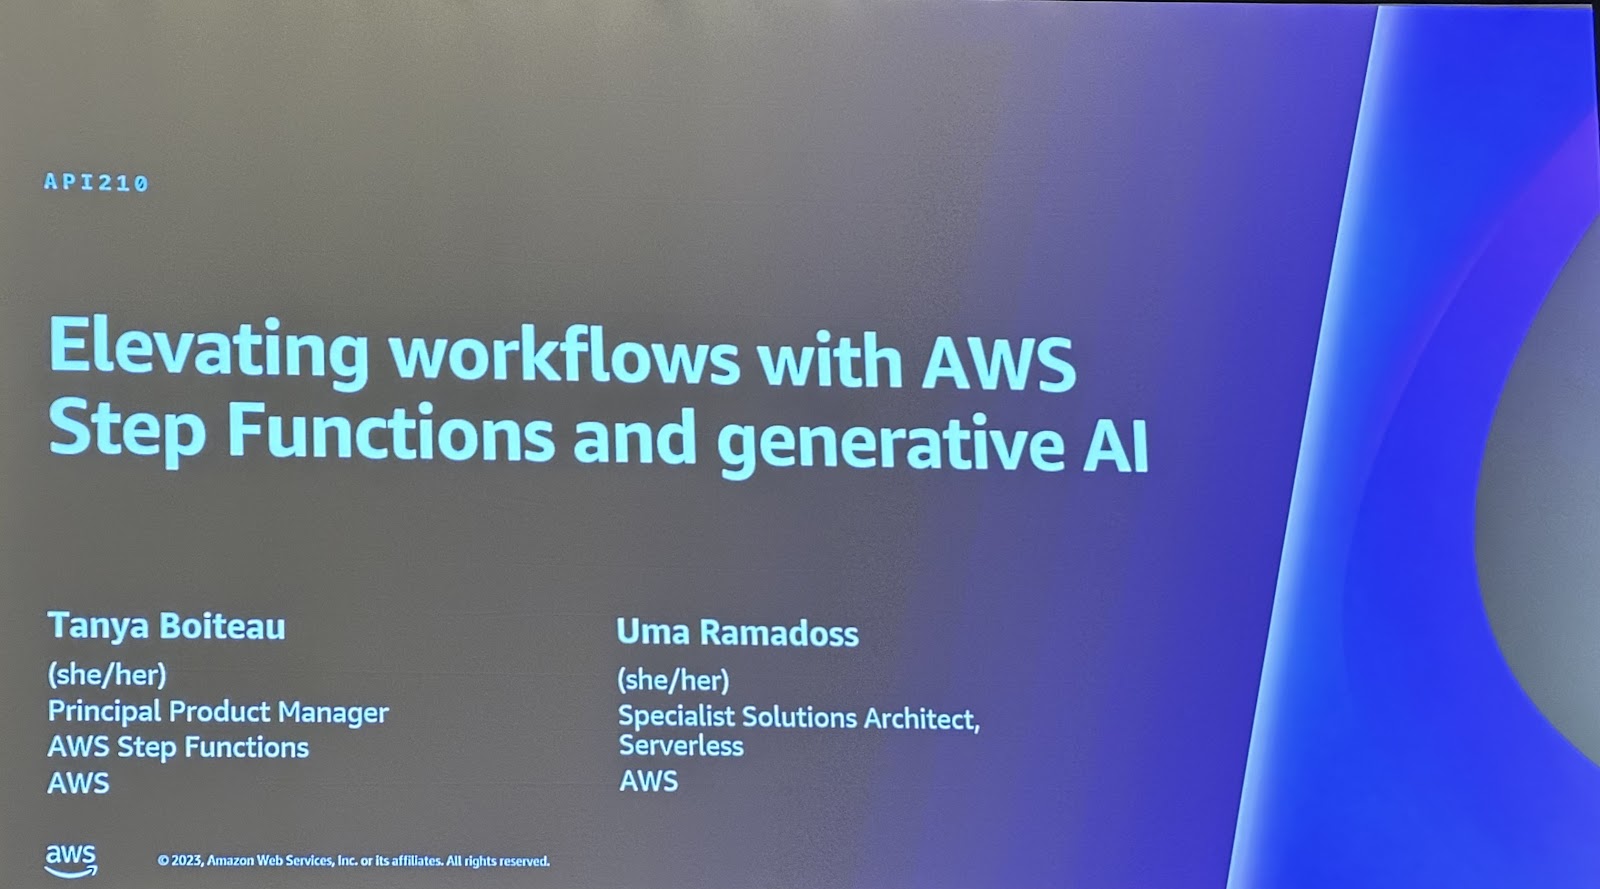 Elevating workflows with AWS Step Functions and generative Al